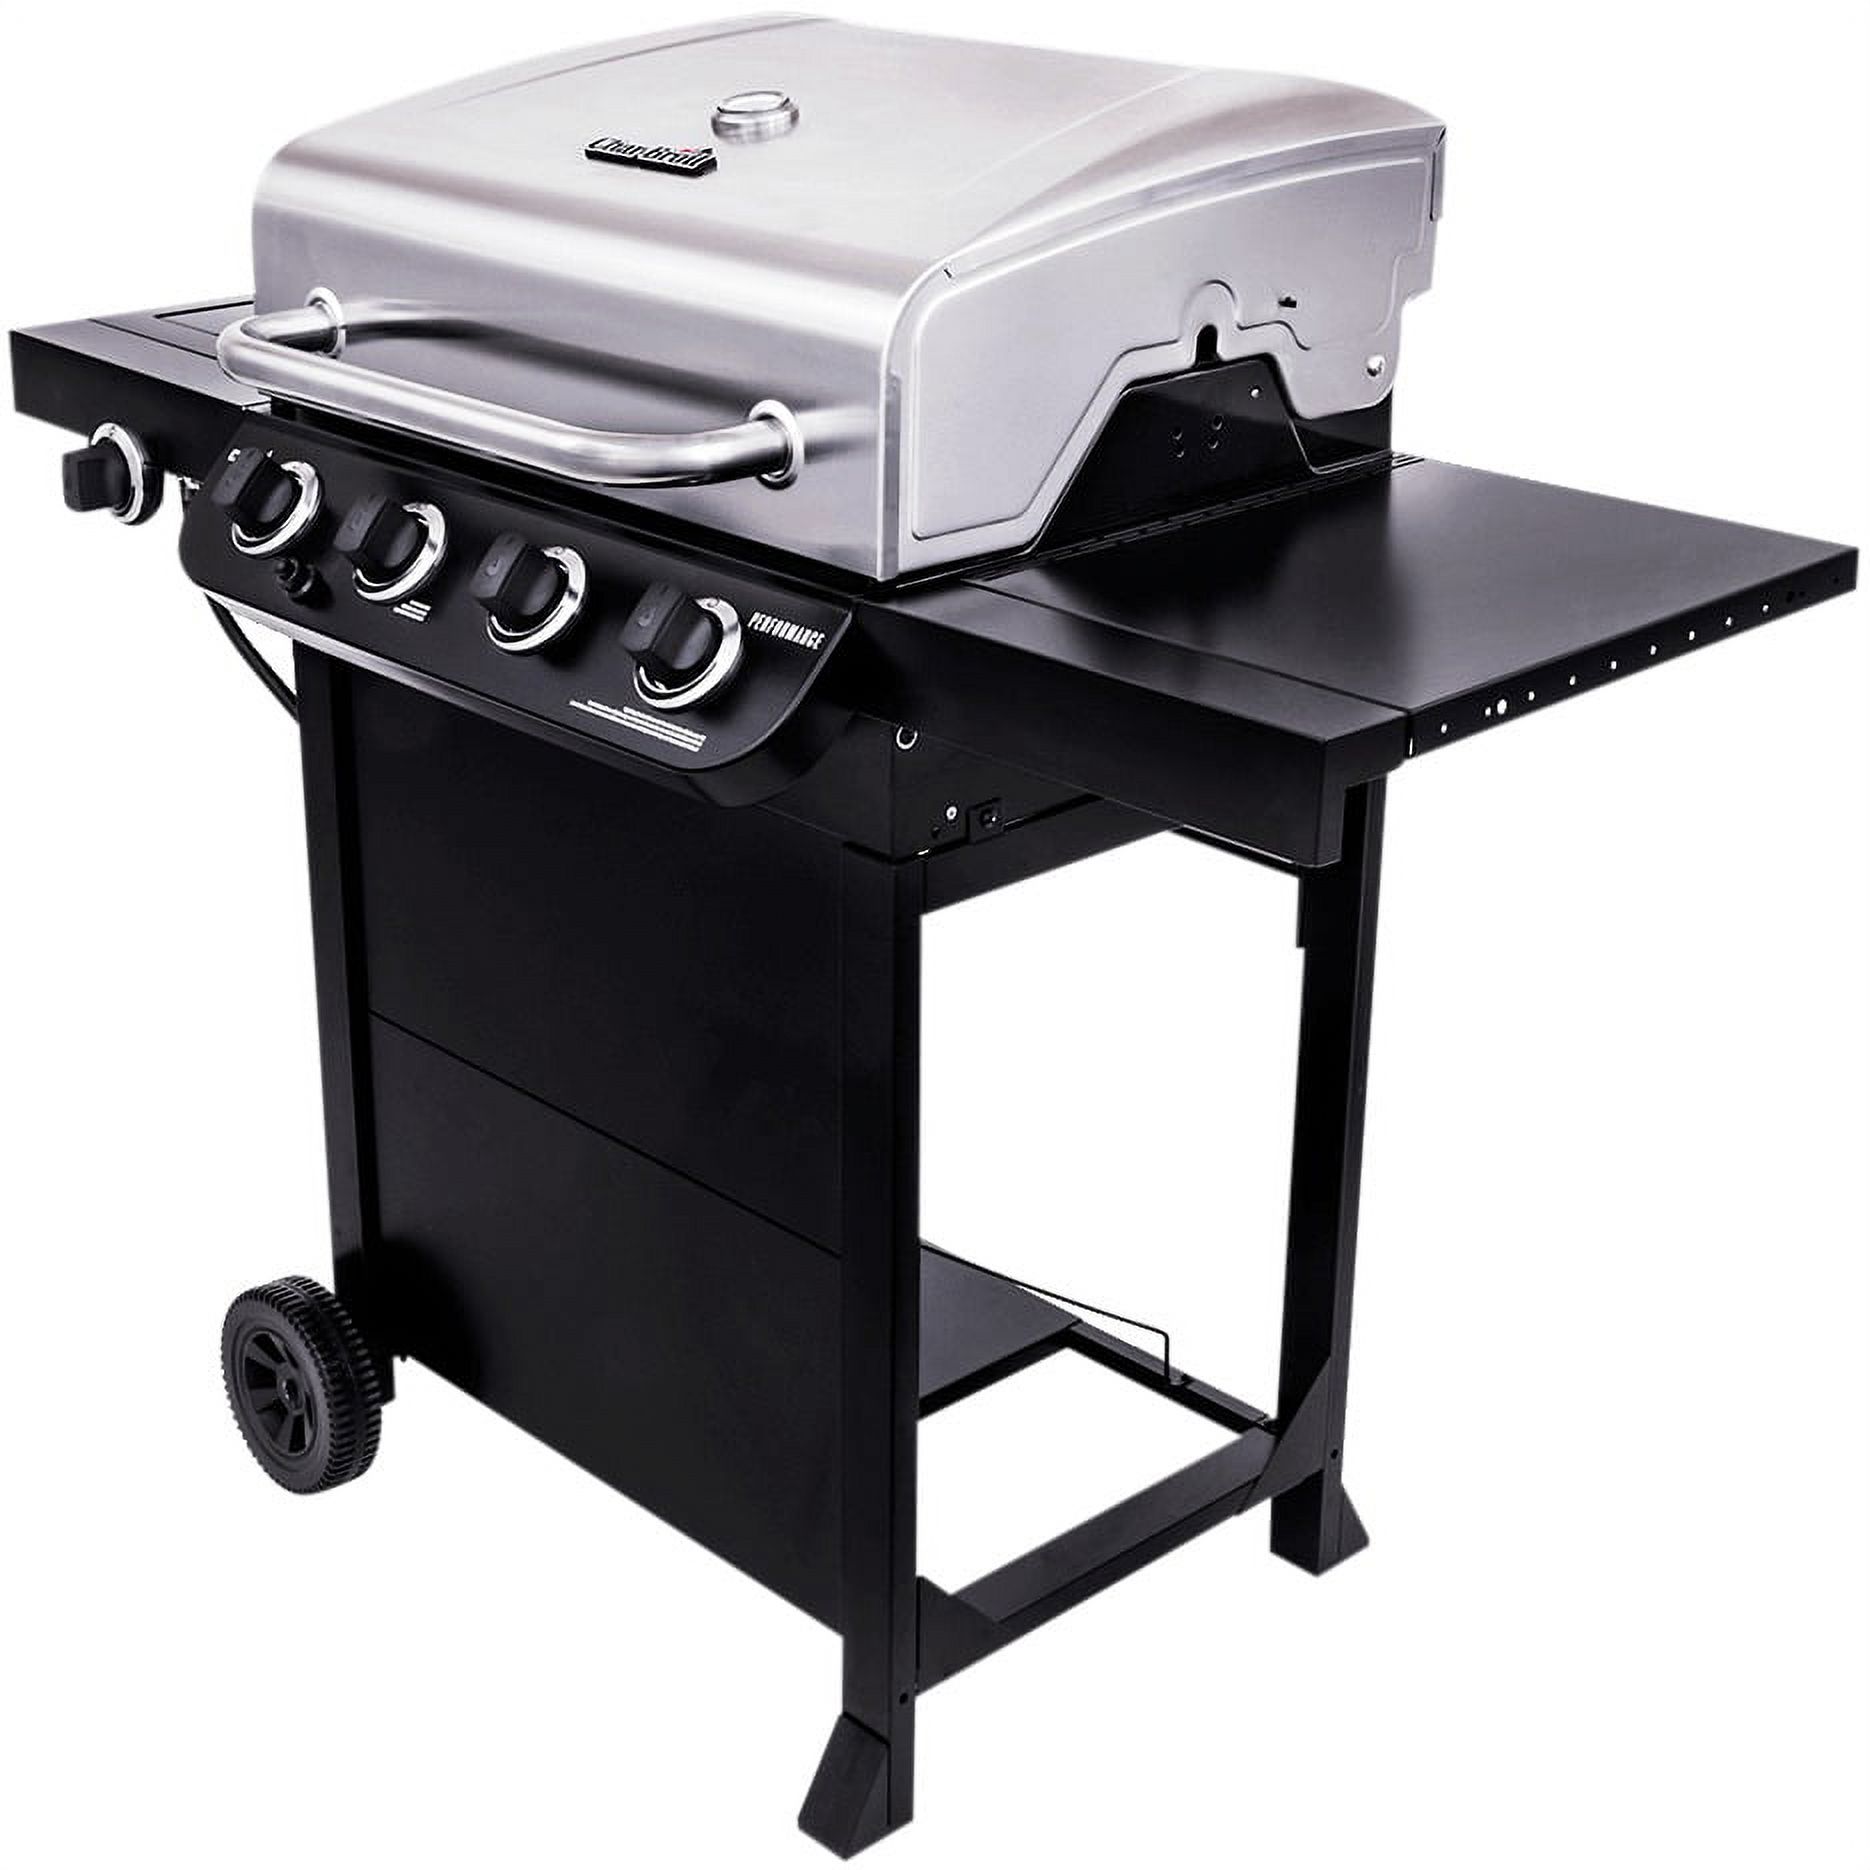 Char-Broil 463347418 Performance 4-Burner Gas Grill - image 3 of 5